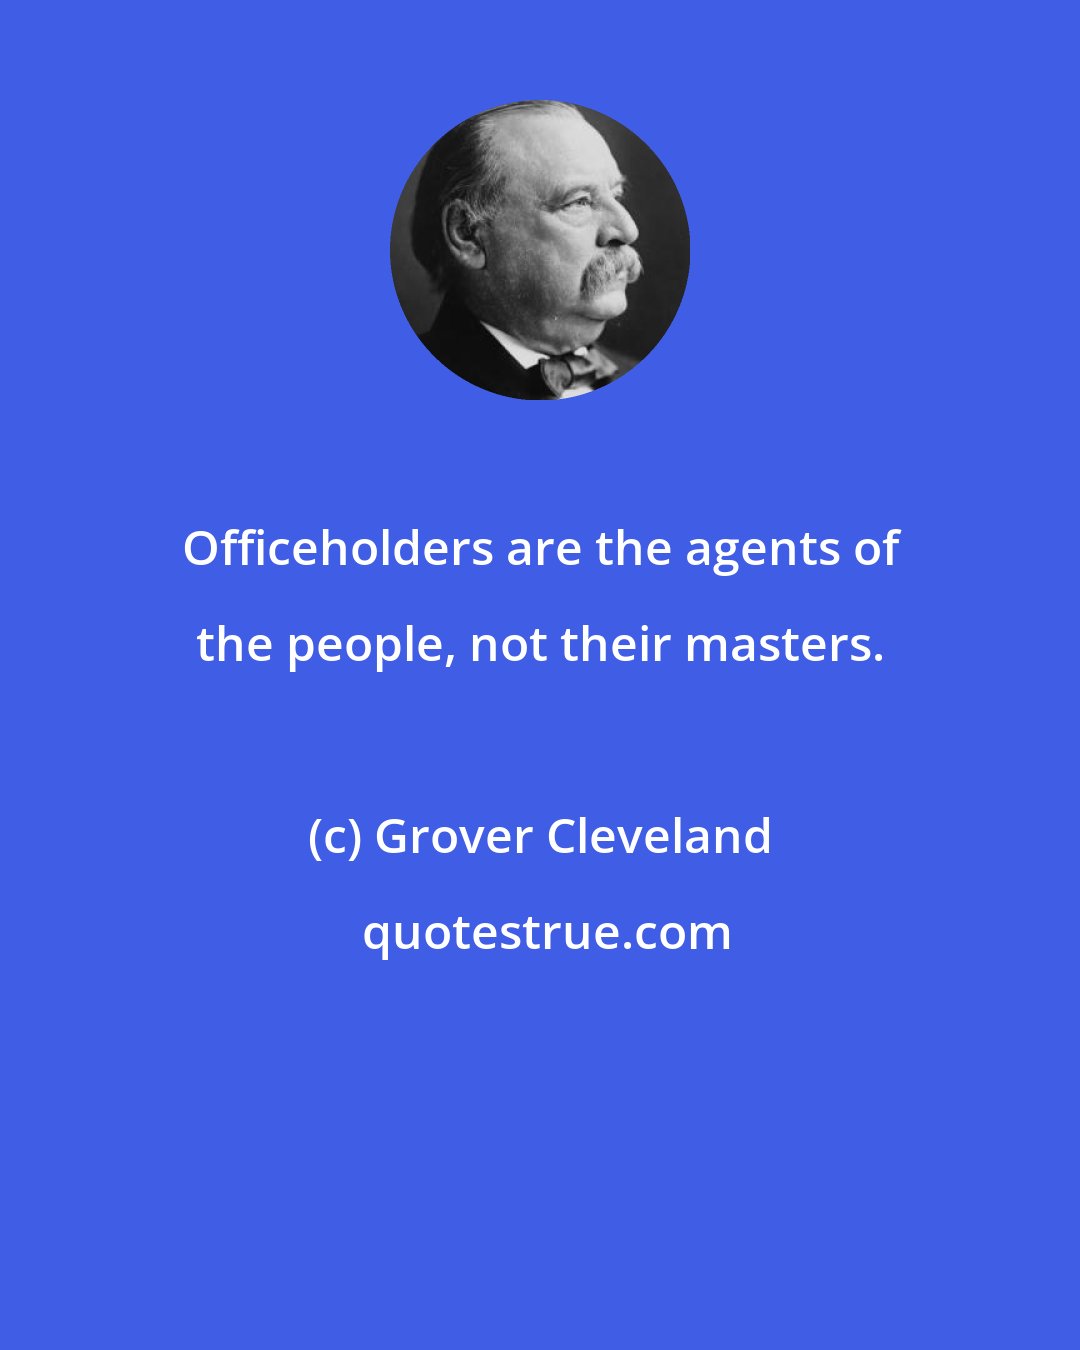 Grover Cleveland: Officeholders are the agents of the people, not their masters.